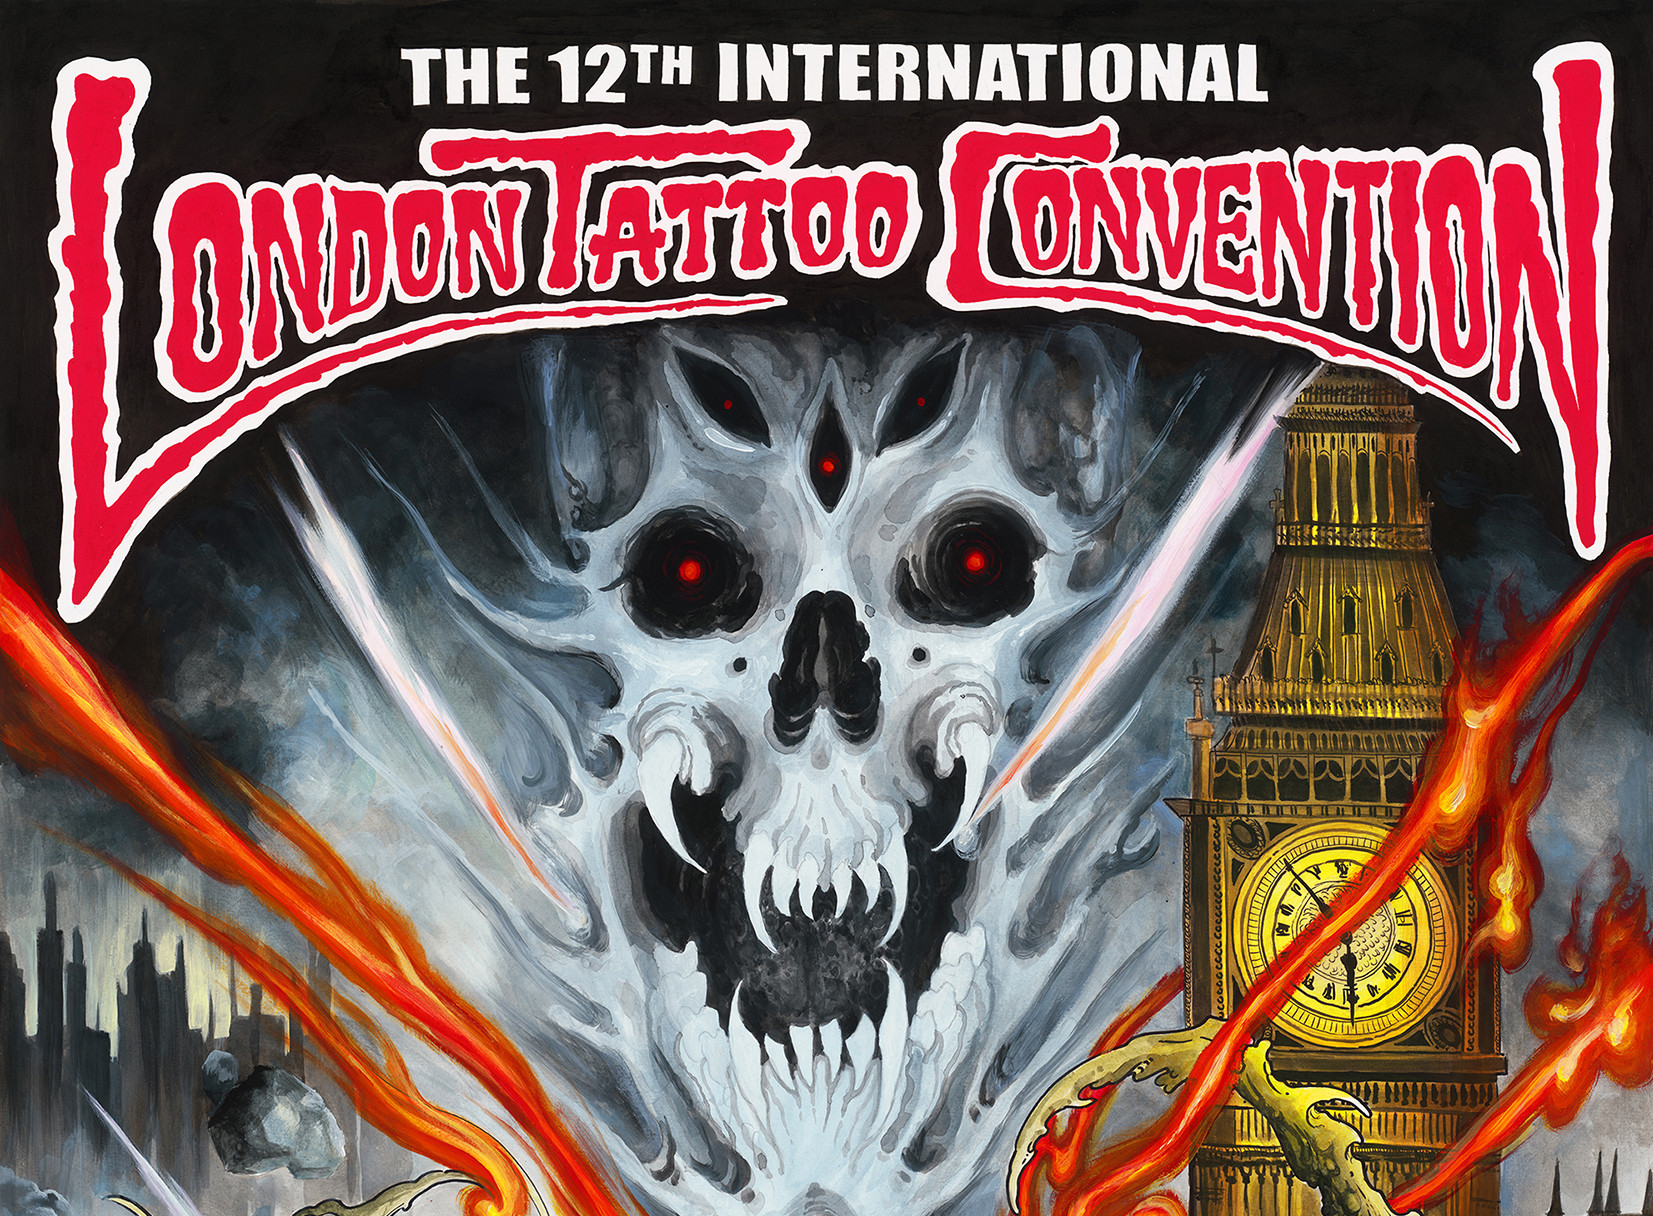 Reportink on tour: London Tattoo Convention – wir sehen uns!